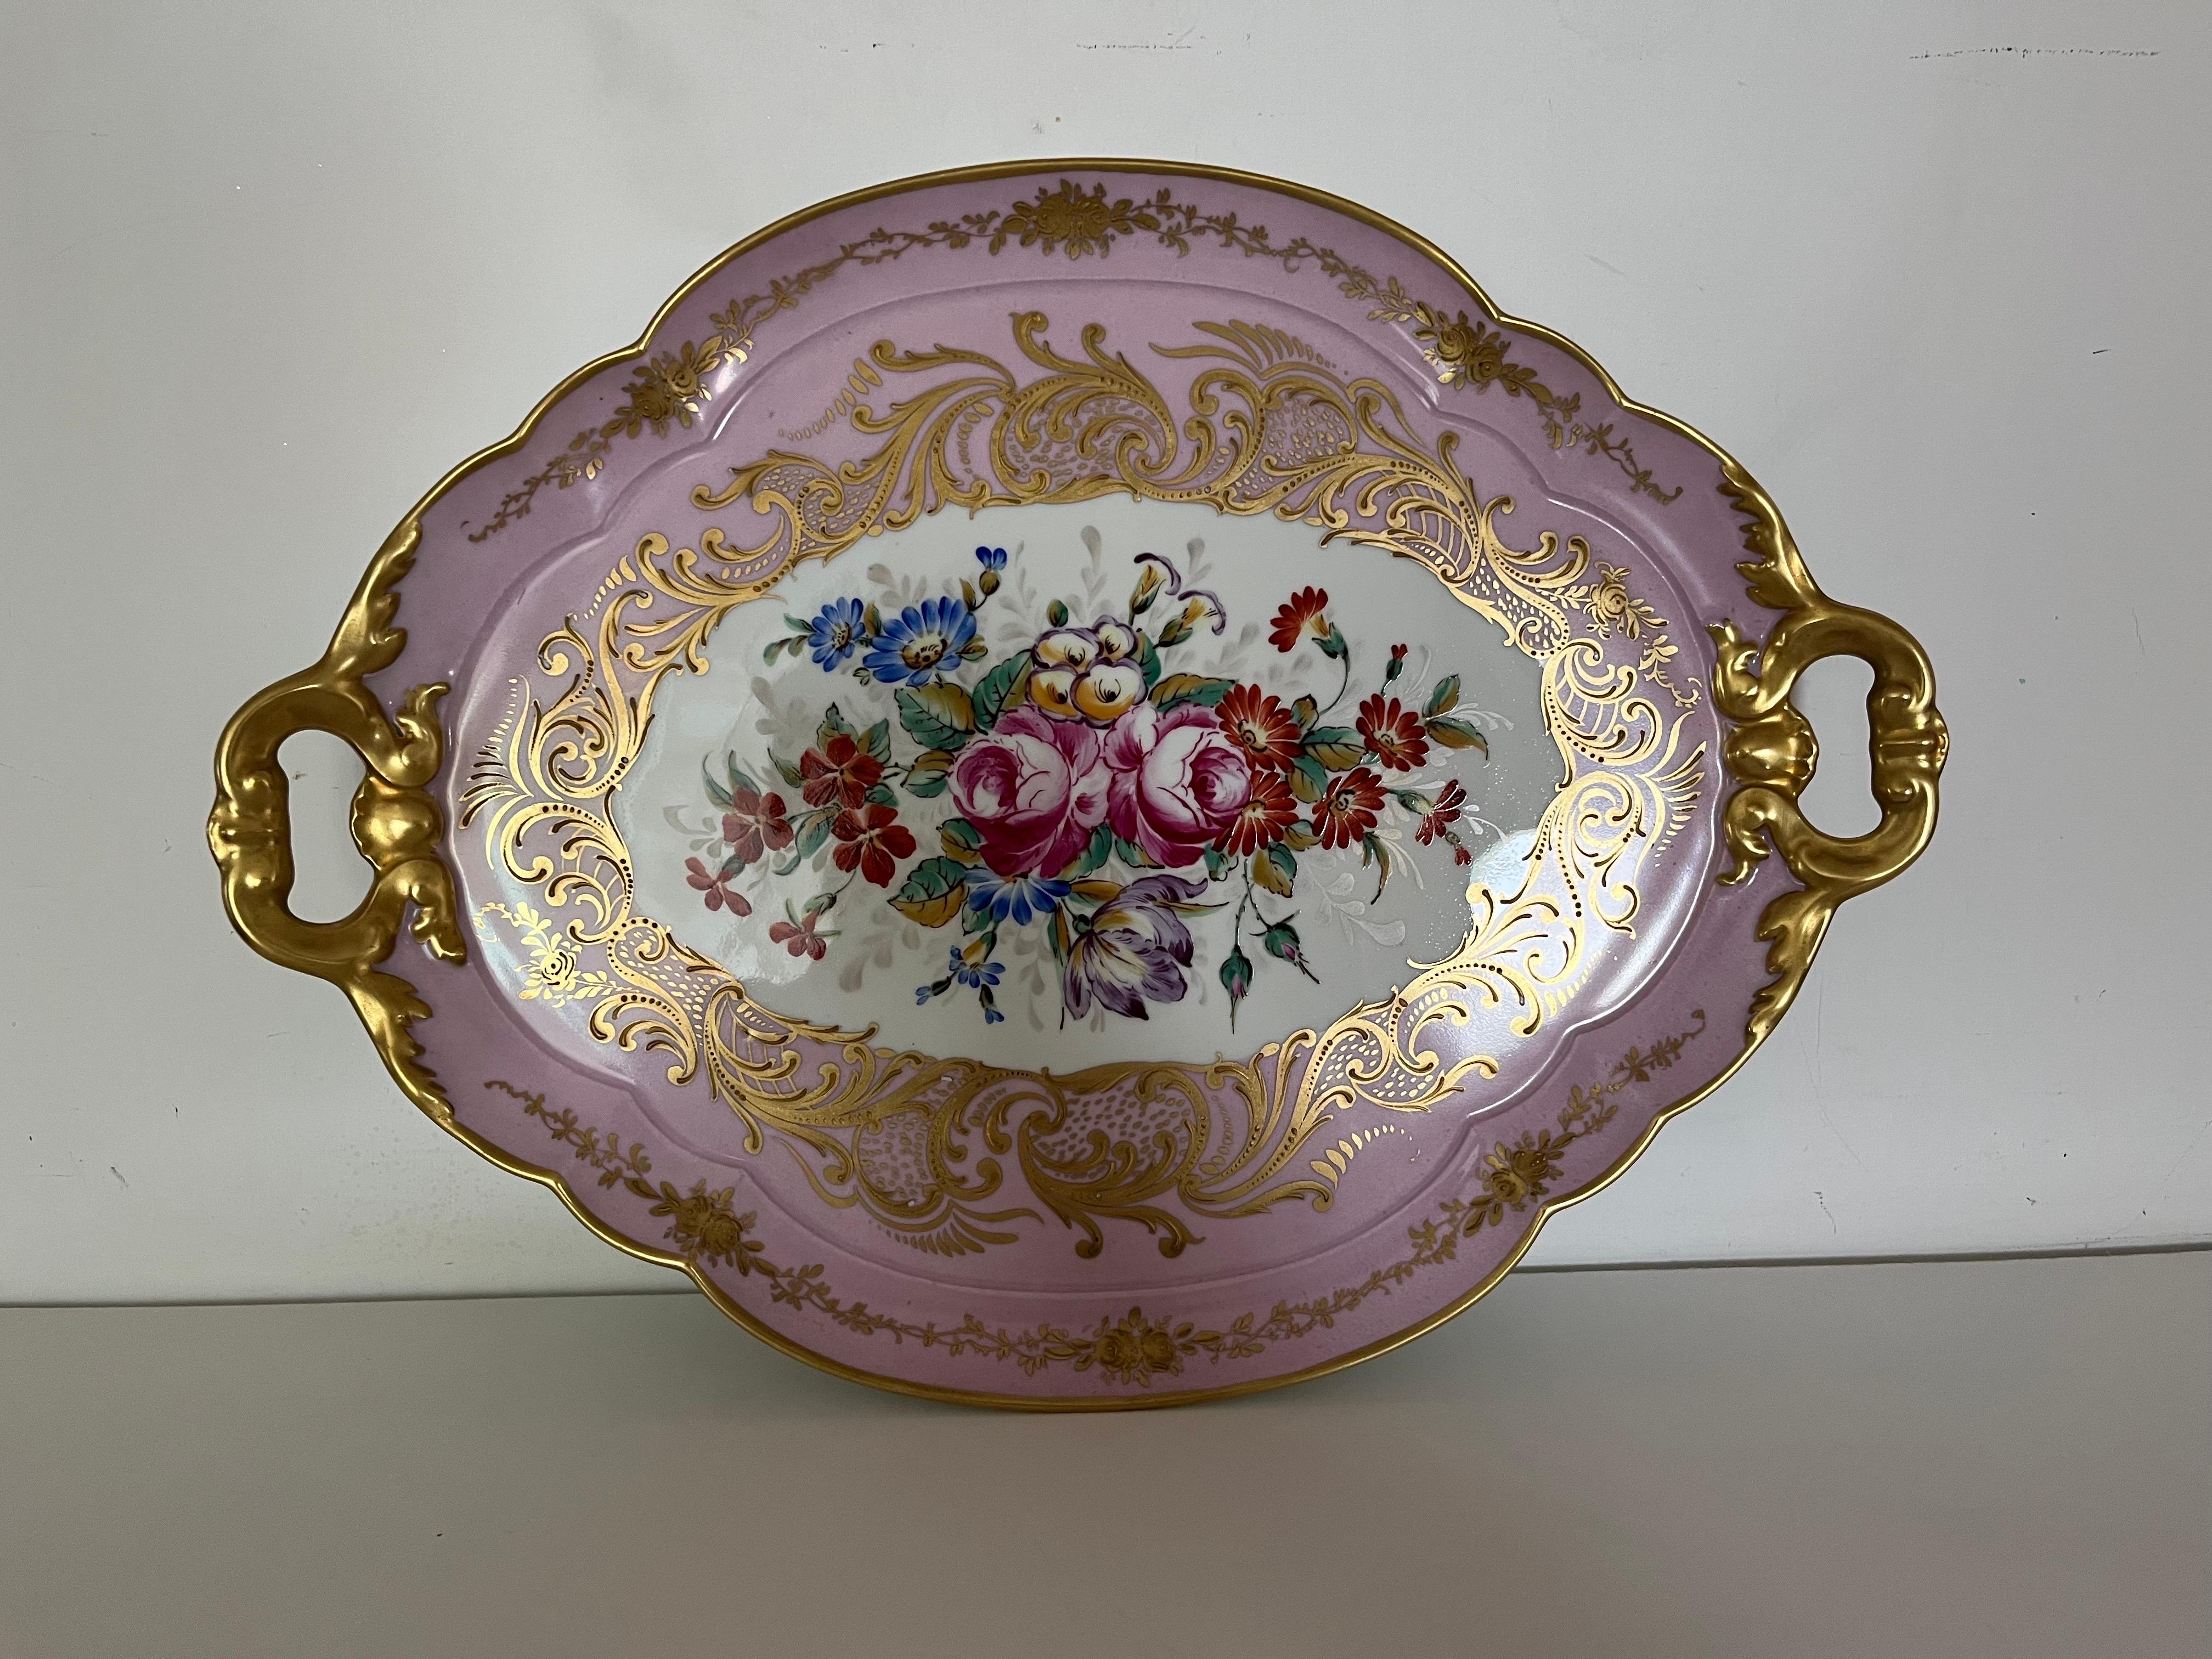 Early 20th Century Vassoio Rosa Limoges France Decorato a mano del '900 -Antiques- For Sale